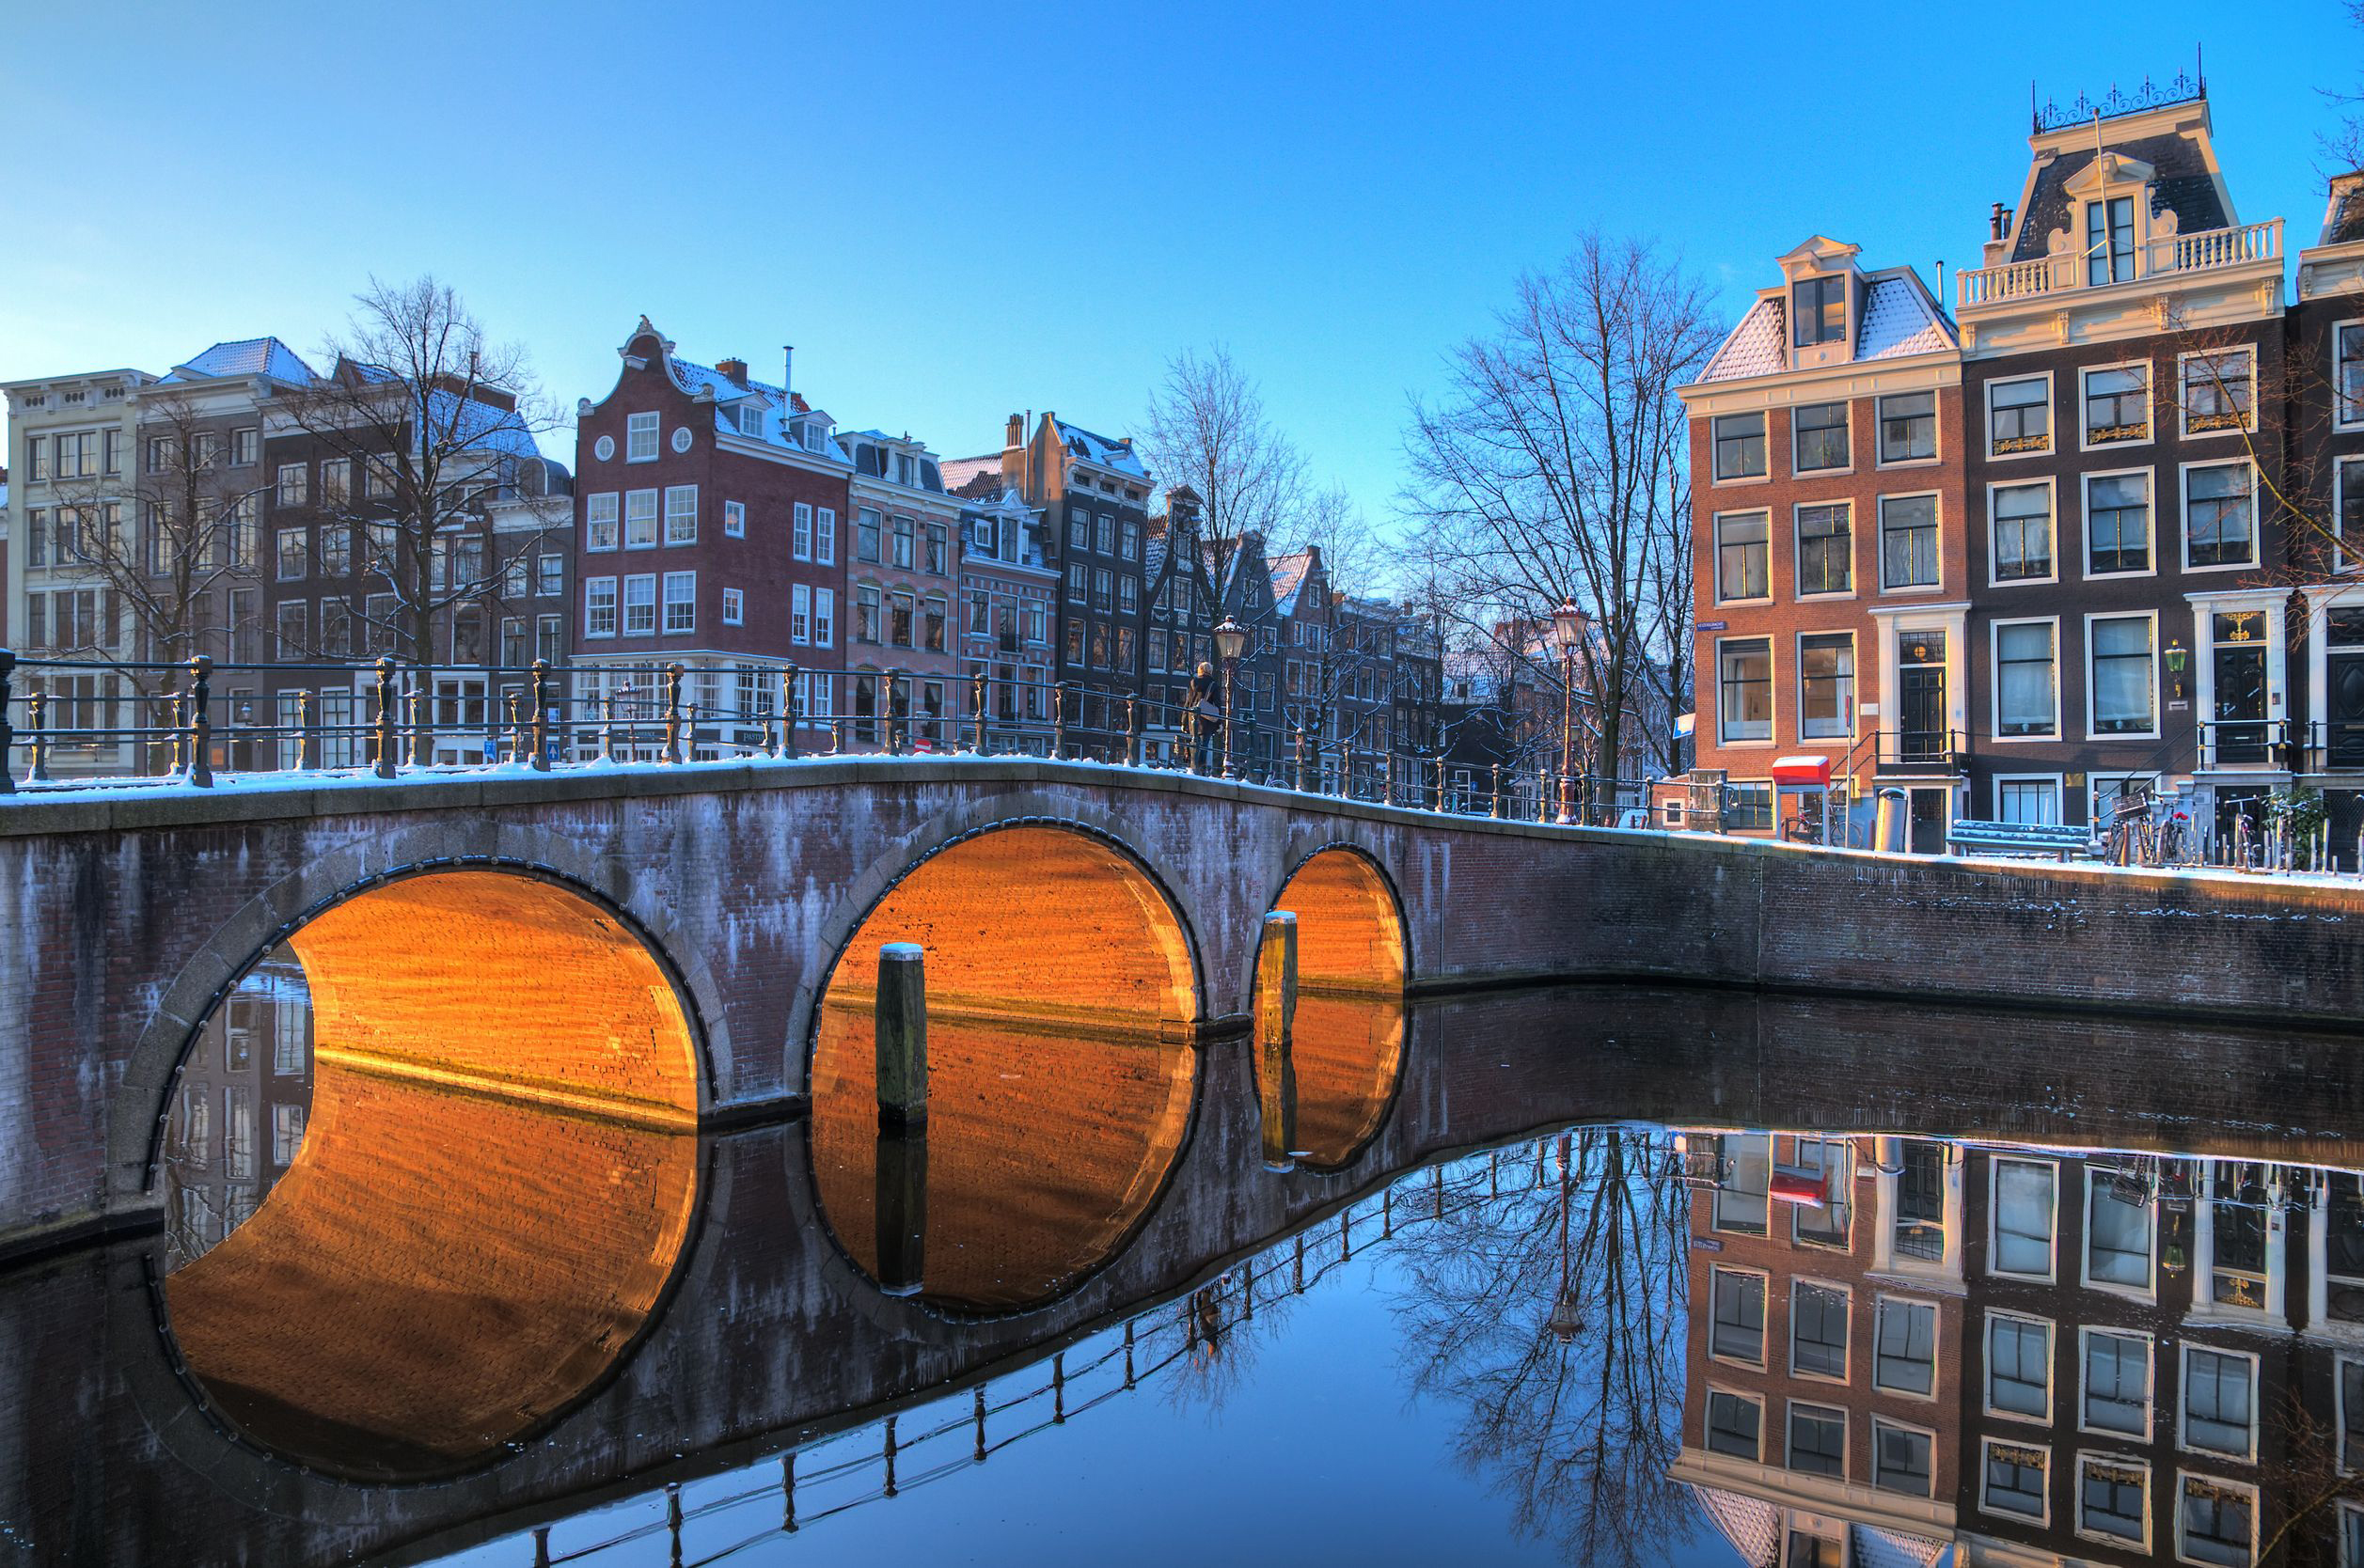 Amsterdam on a winter morning. Copyright: dennisvdwater, at 123RF Stock Photo.